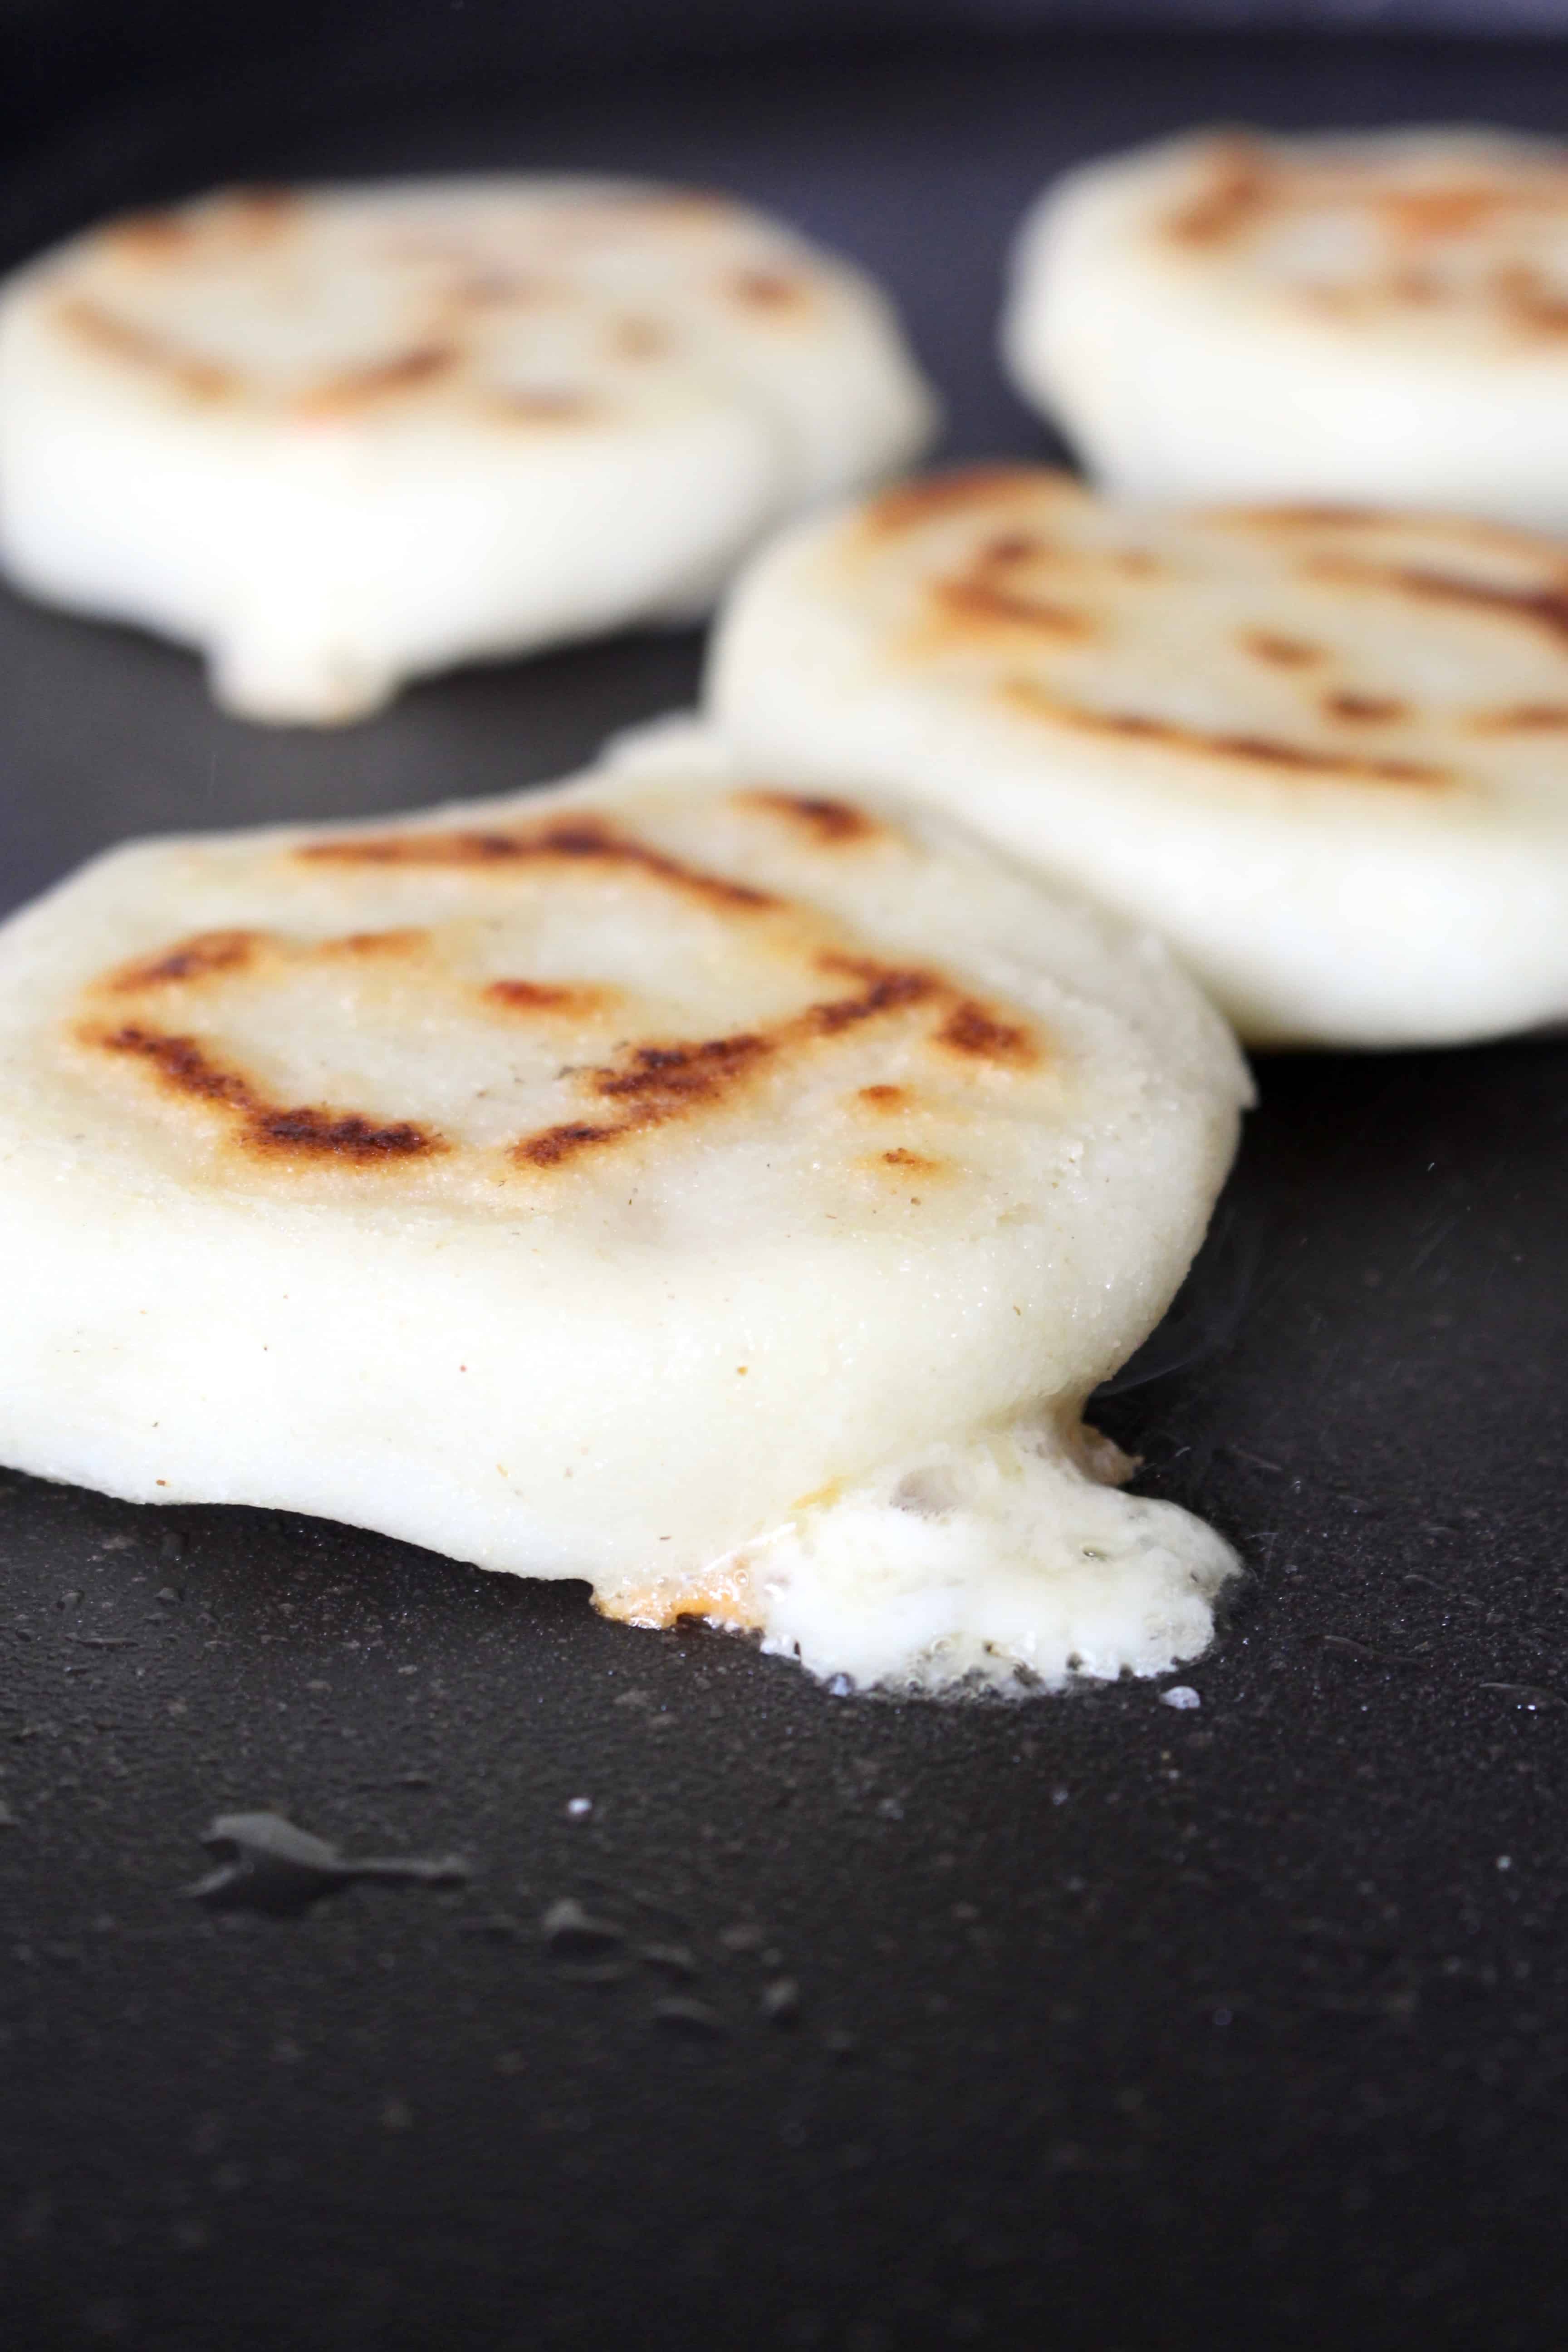 Cheese oozing out of an arepa cooking on a black griddle.